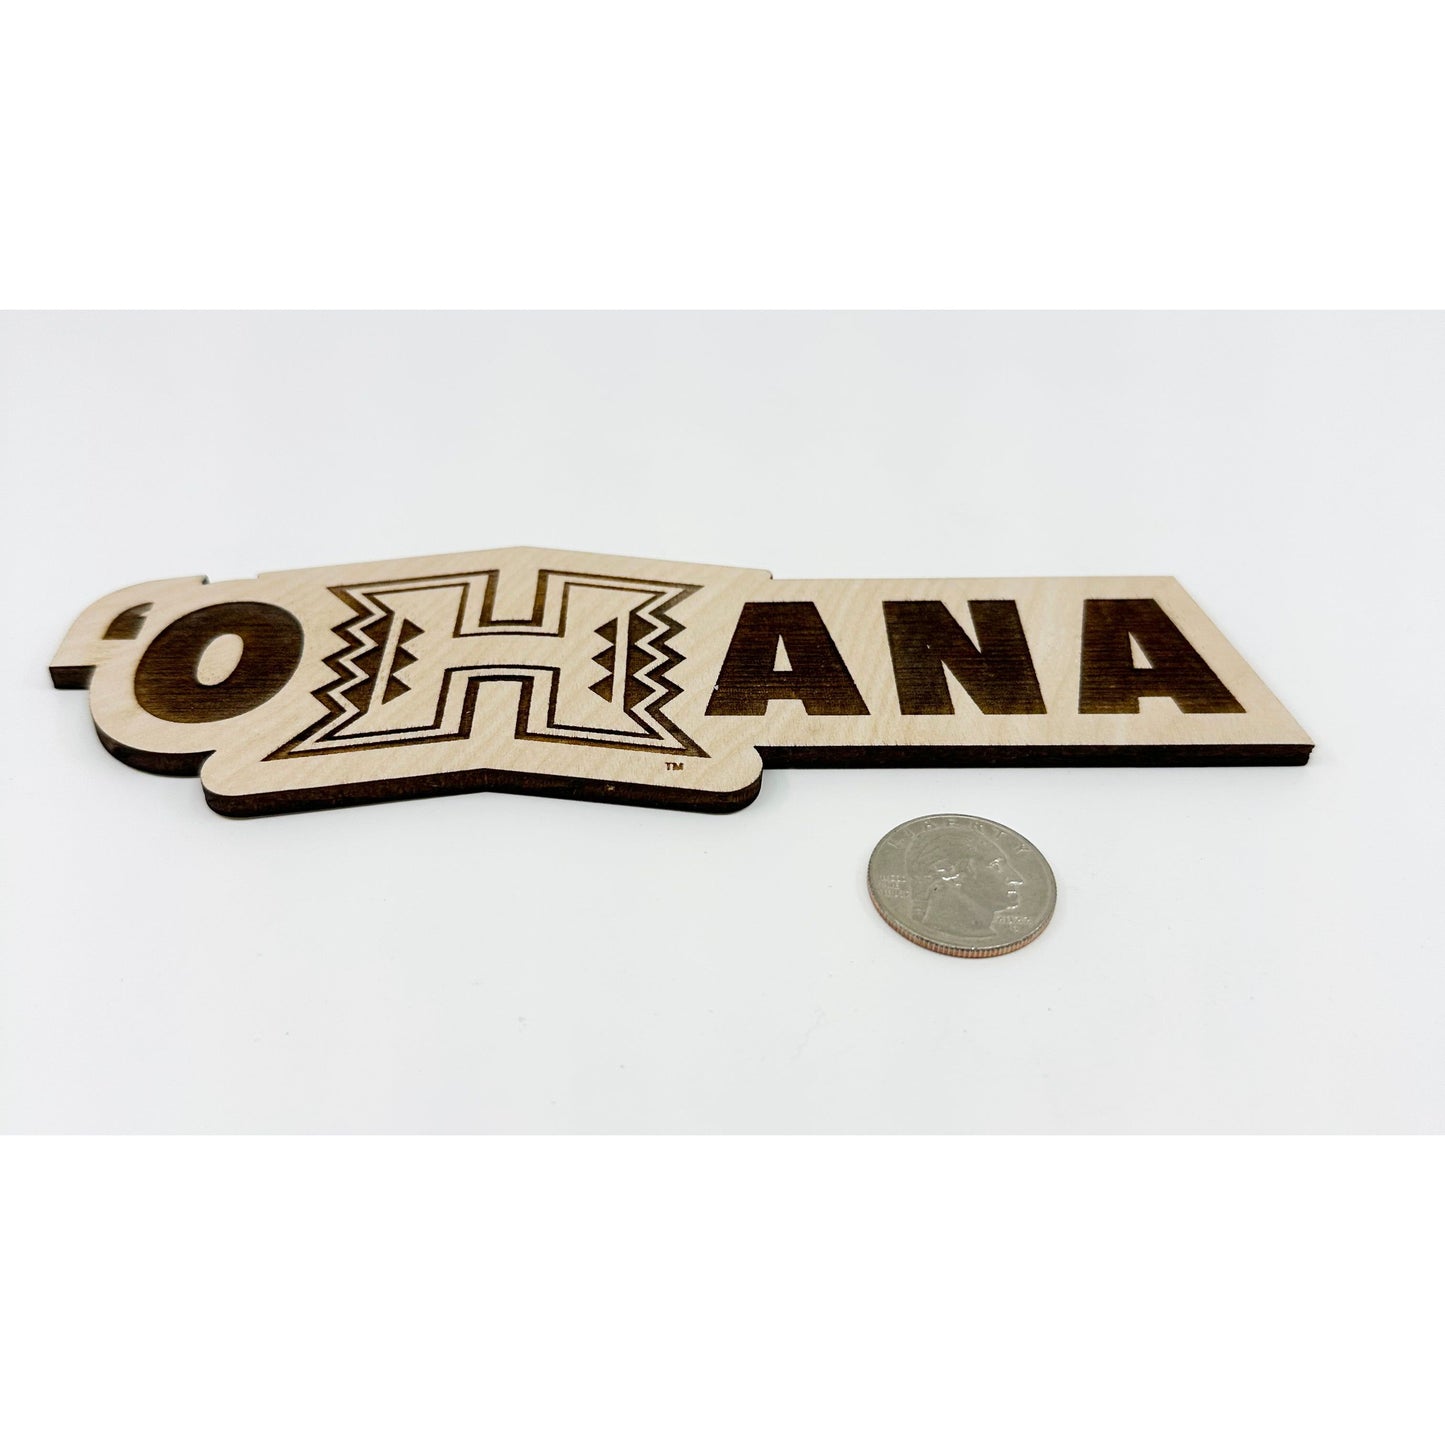 Officially Licensed University of Hawaii OHana Wood Sign